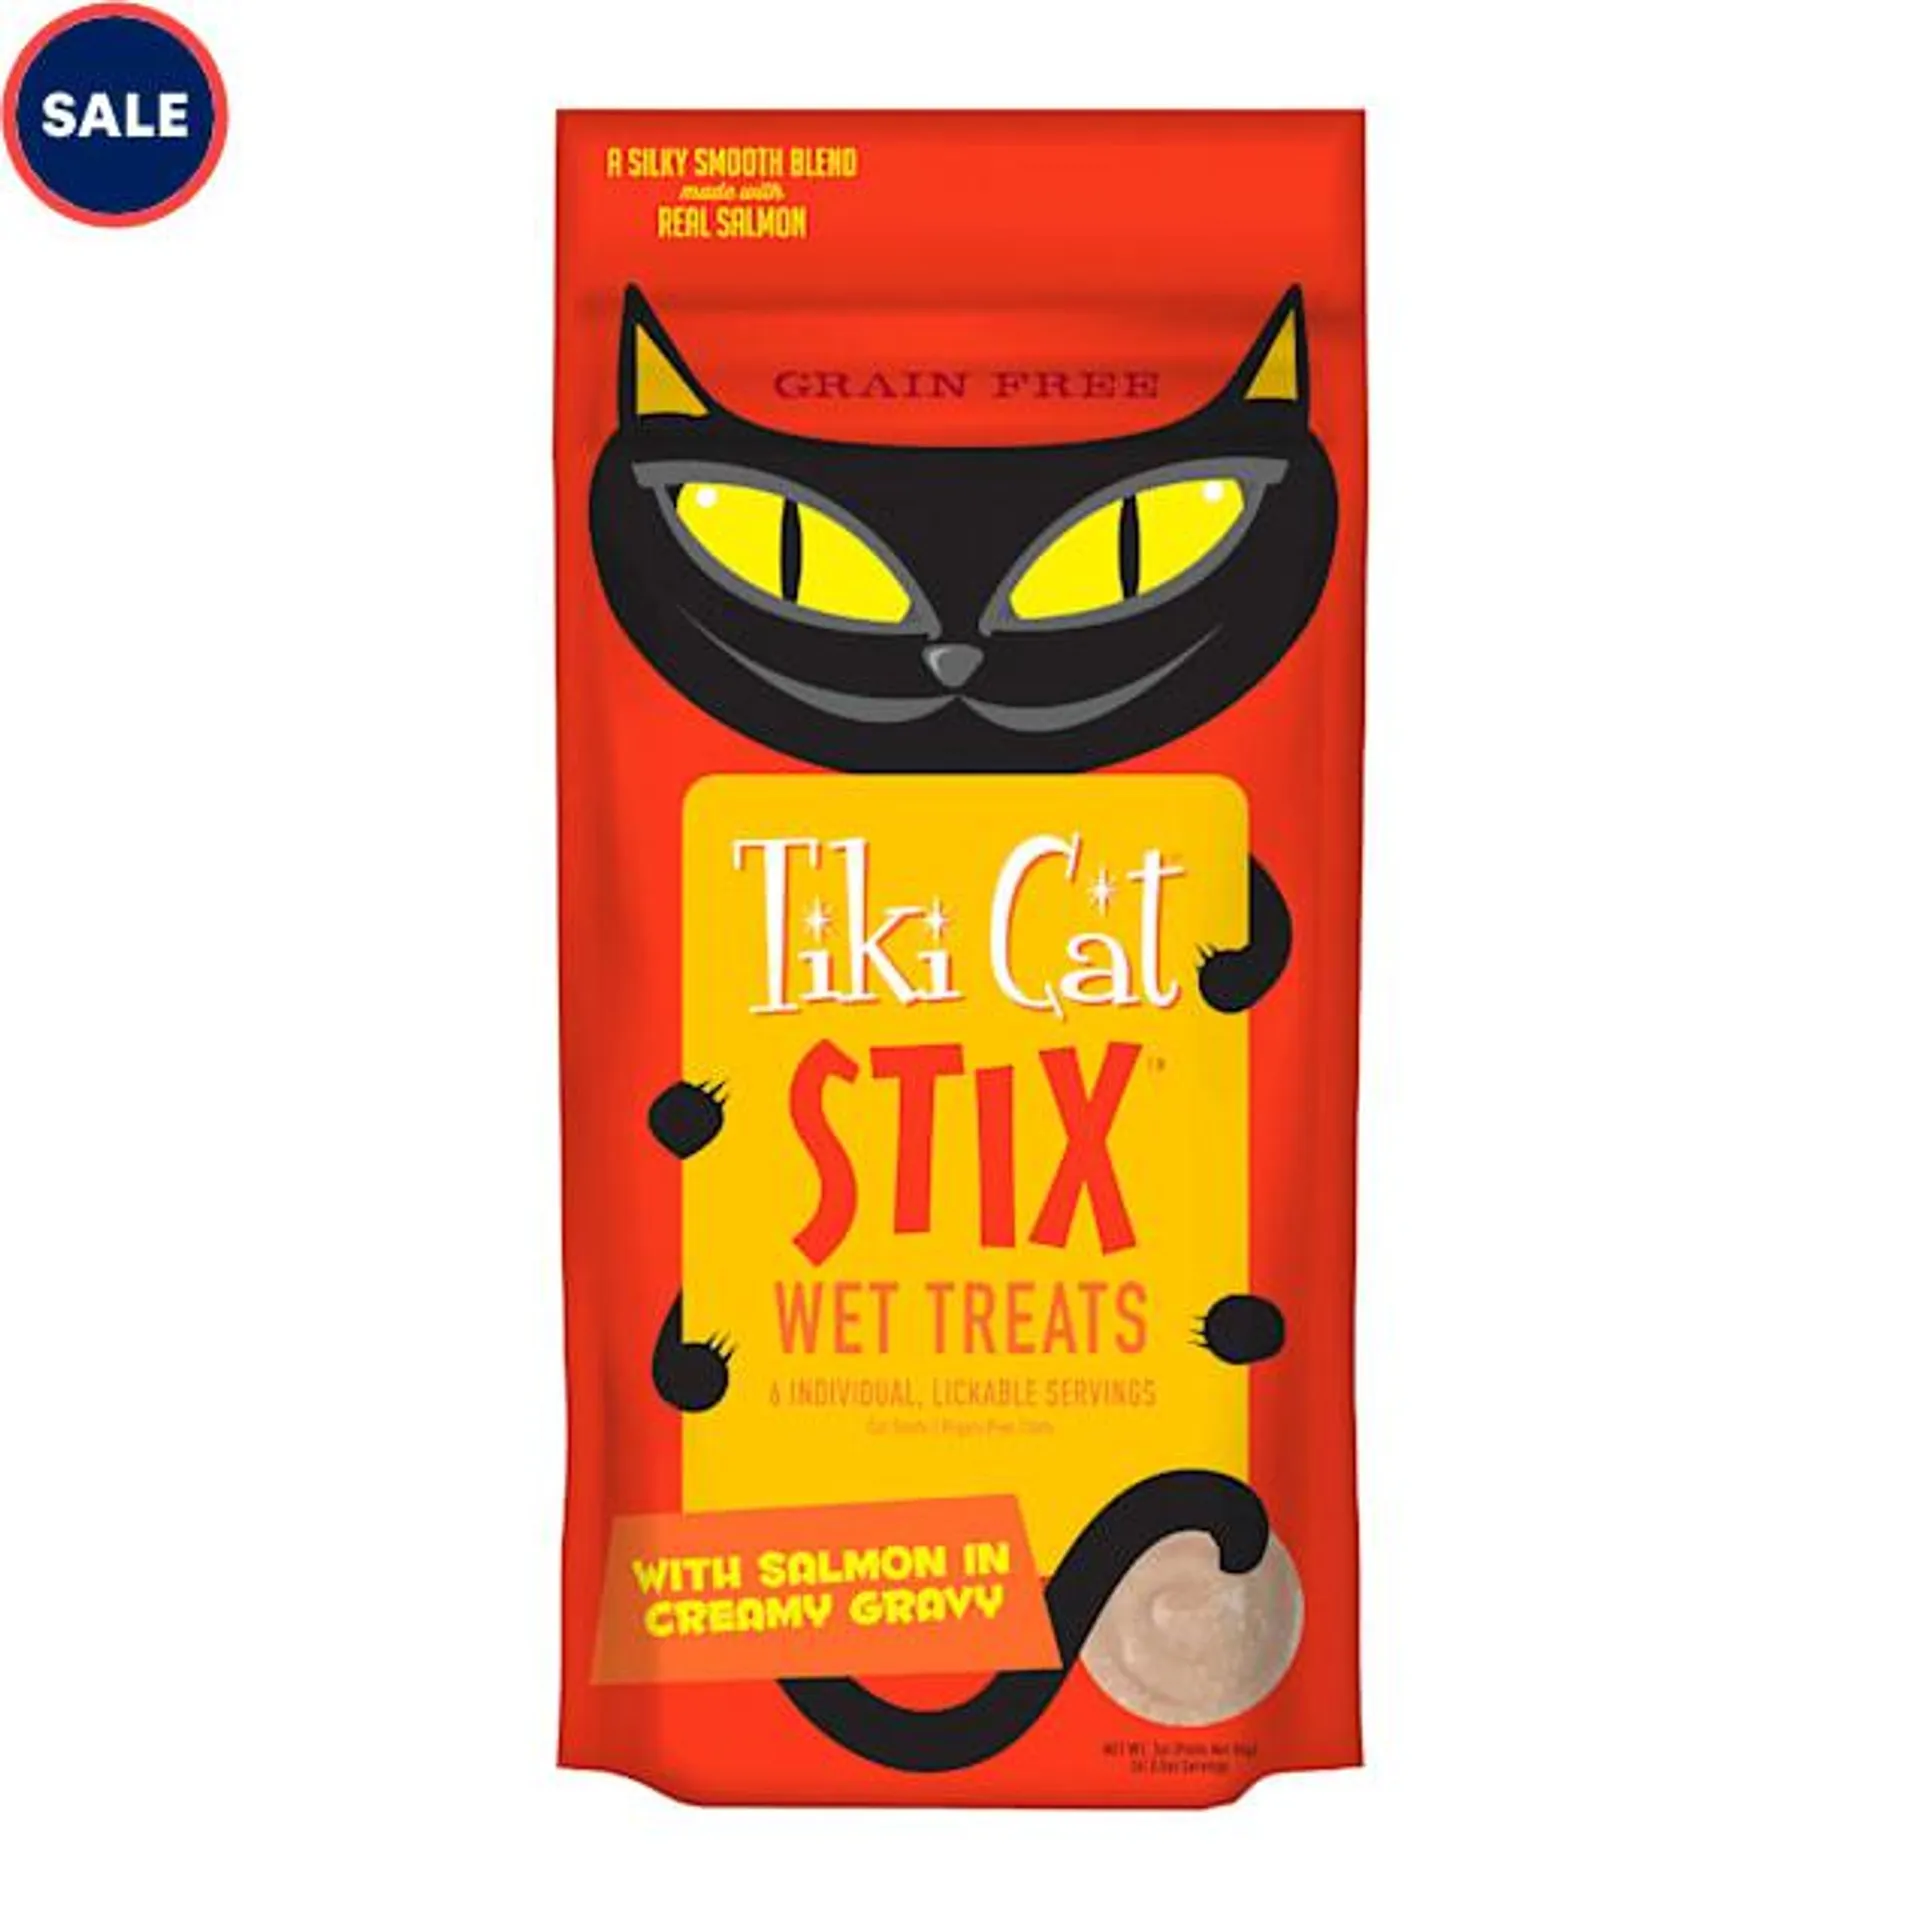 Tiki Cat Stix Salmon Wet Treat in Lickable Tube for Cats, 0.5 oz, Count of 6